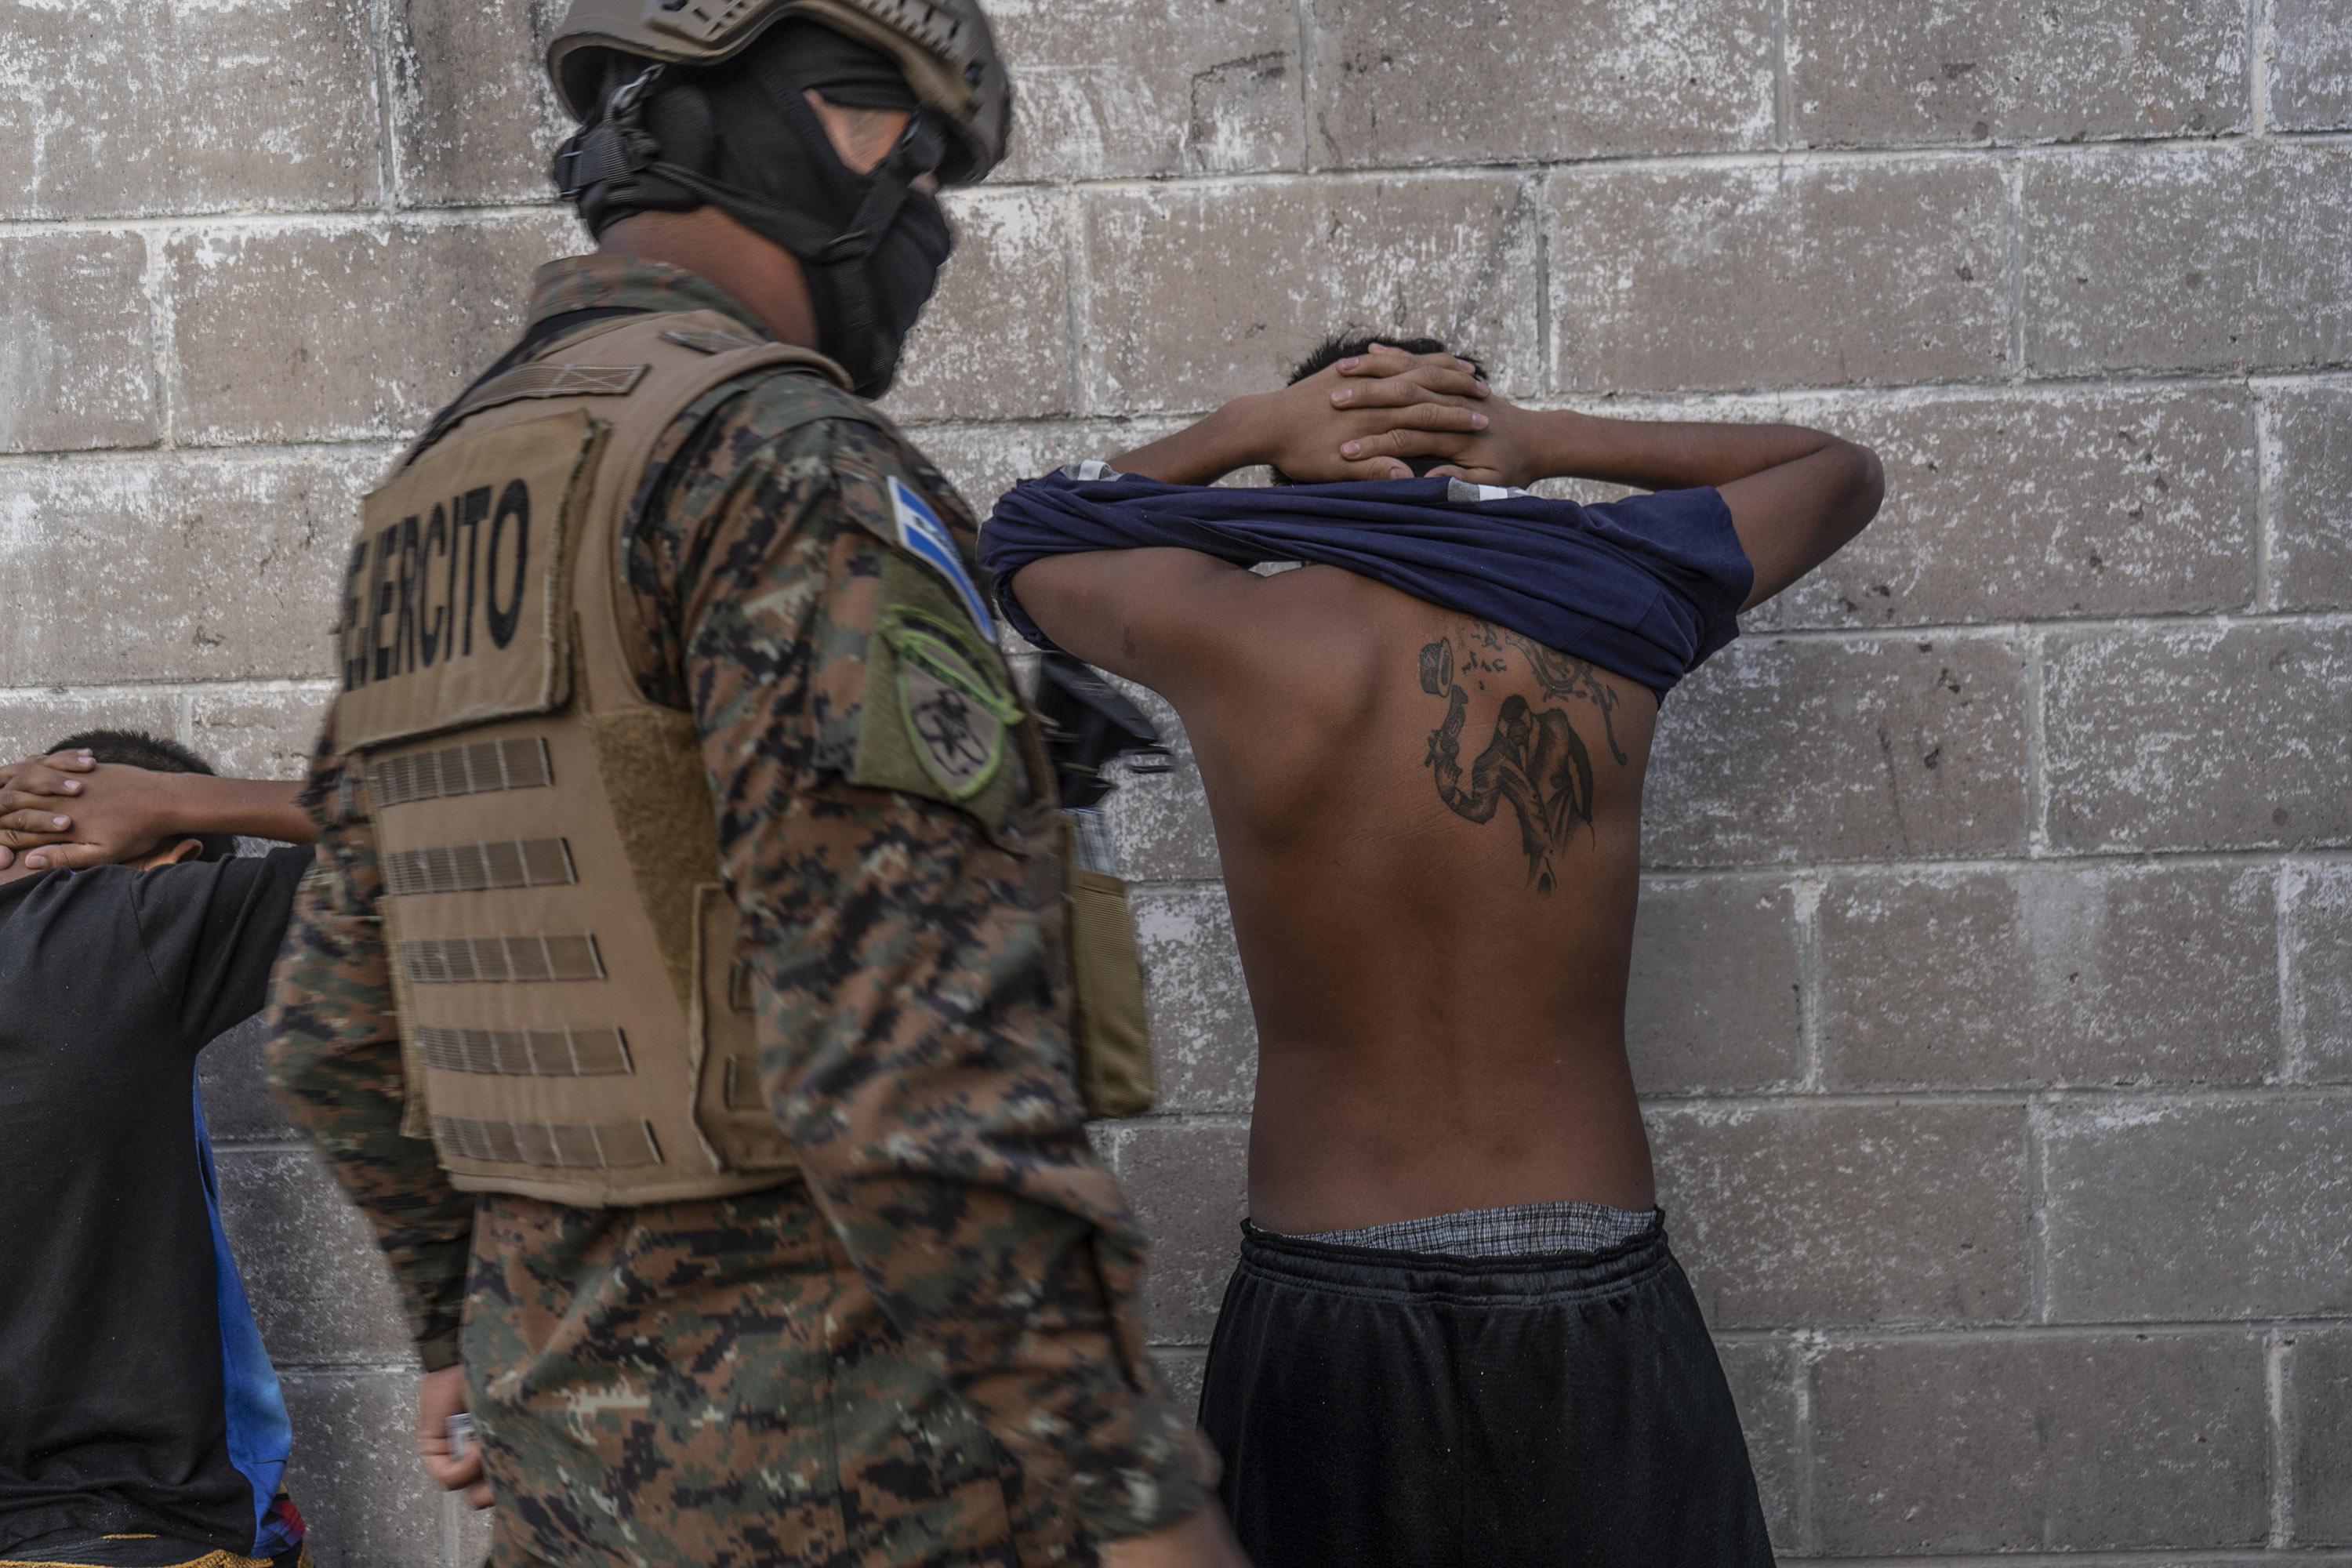 Through August 2, authorities registered more than 48,000 arrests during the state of exception. Many report that their relatives were arbitrarily detained for having tattoos not even alluding to gangs. Photo: Carlos Barrera/El Faro